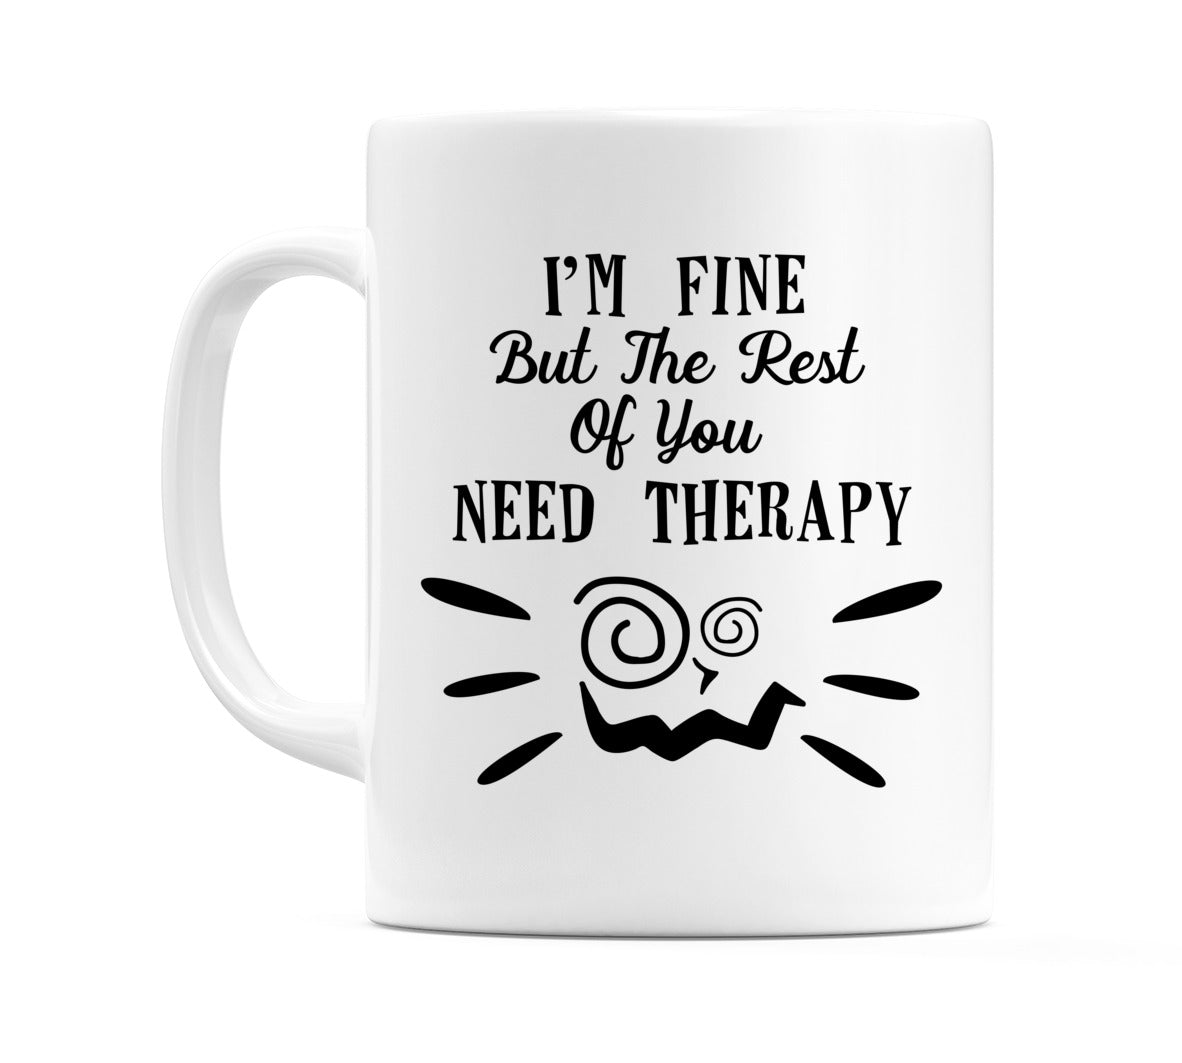 I'm Fine But The Rest of You Need Therapy Mug